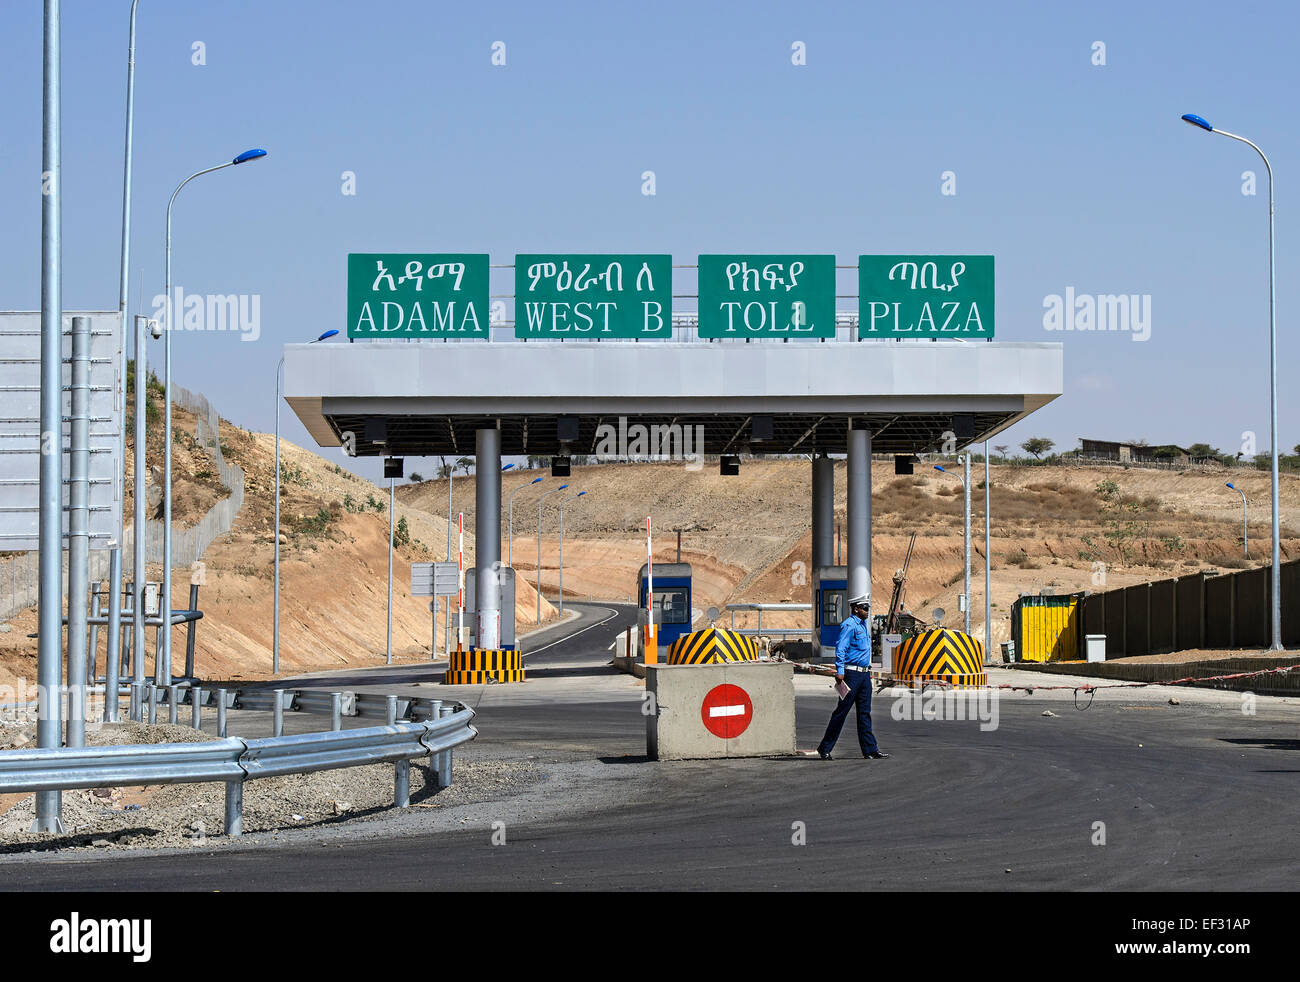 Adama-West Tollgate, opened in September 2014, on the highway between Addis Ababa and Adama, Oromia Region, Ethiopia Stock Photo